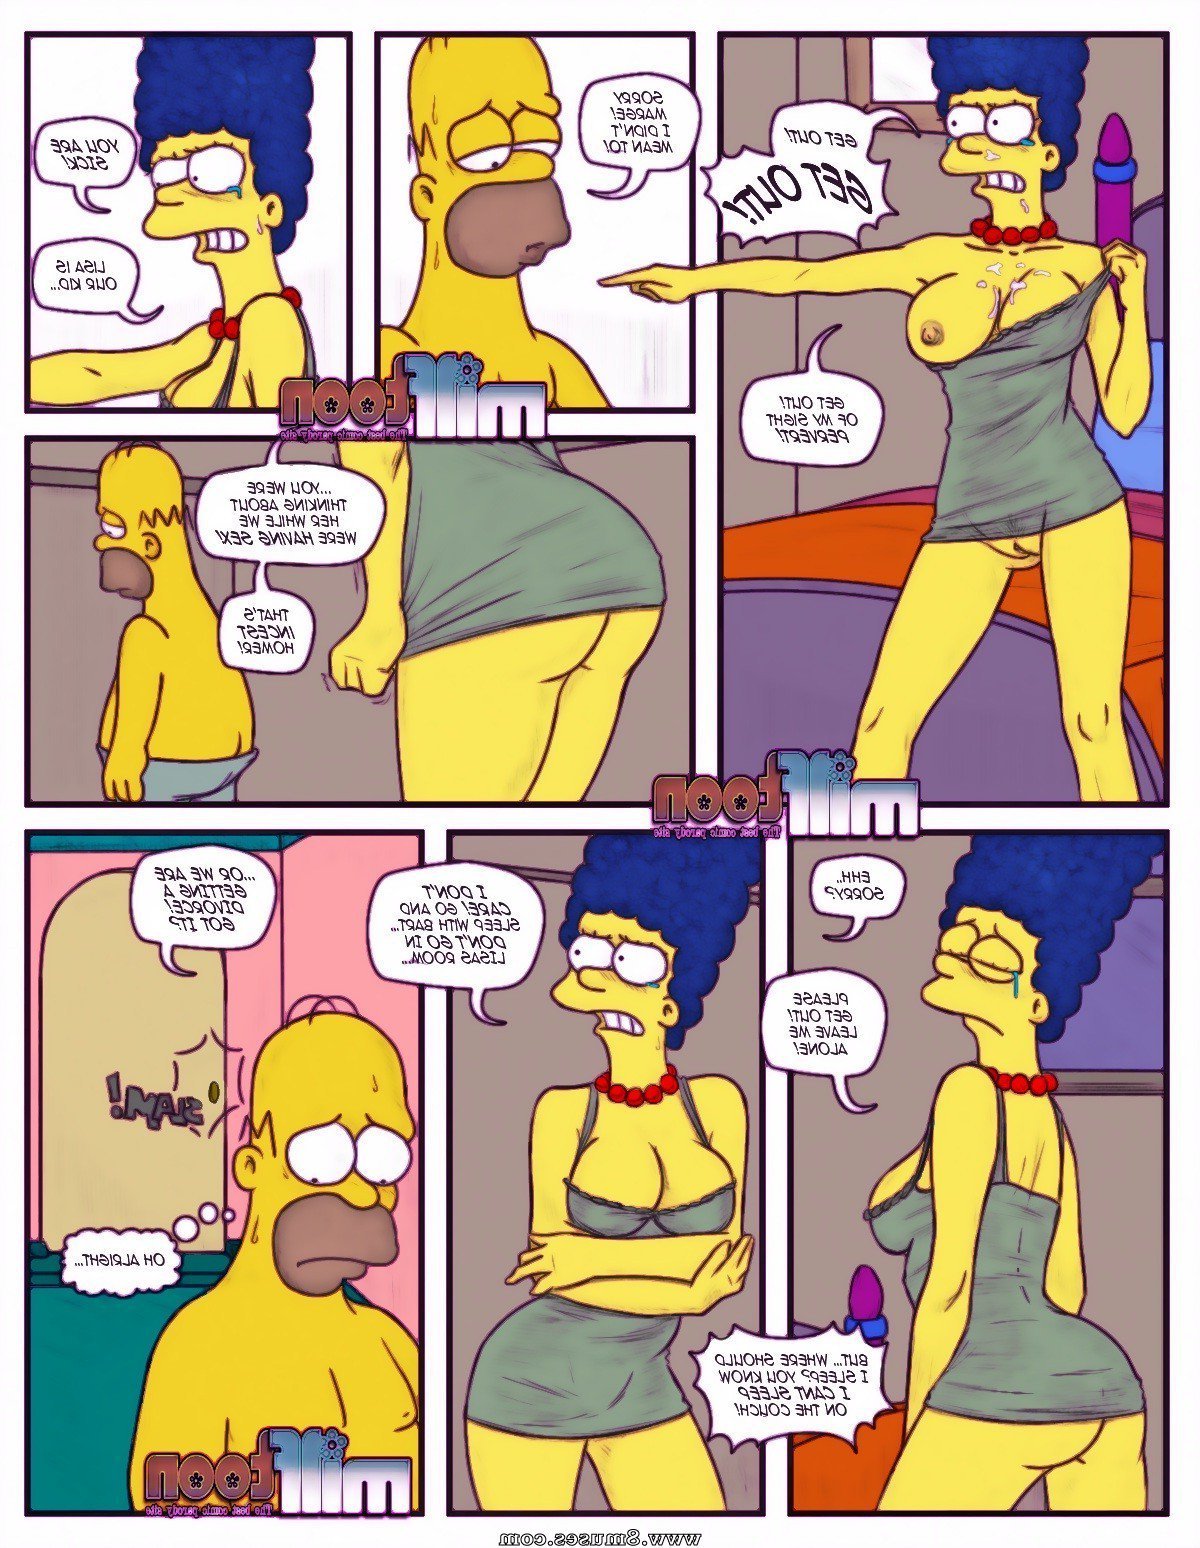 MilfToon-Comics/The-Simpsons/Issue-1 The_Simpsons_-_Issue_1_10.jpg